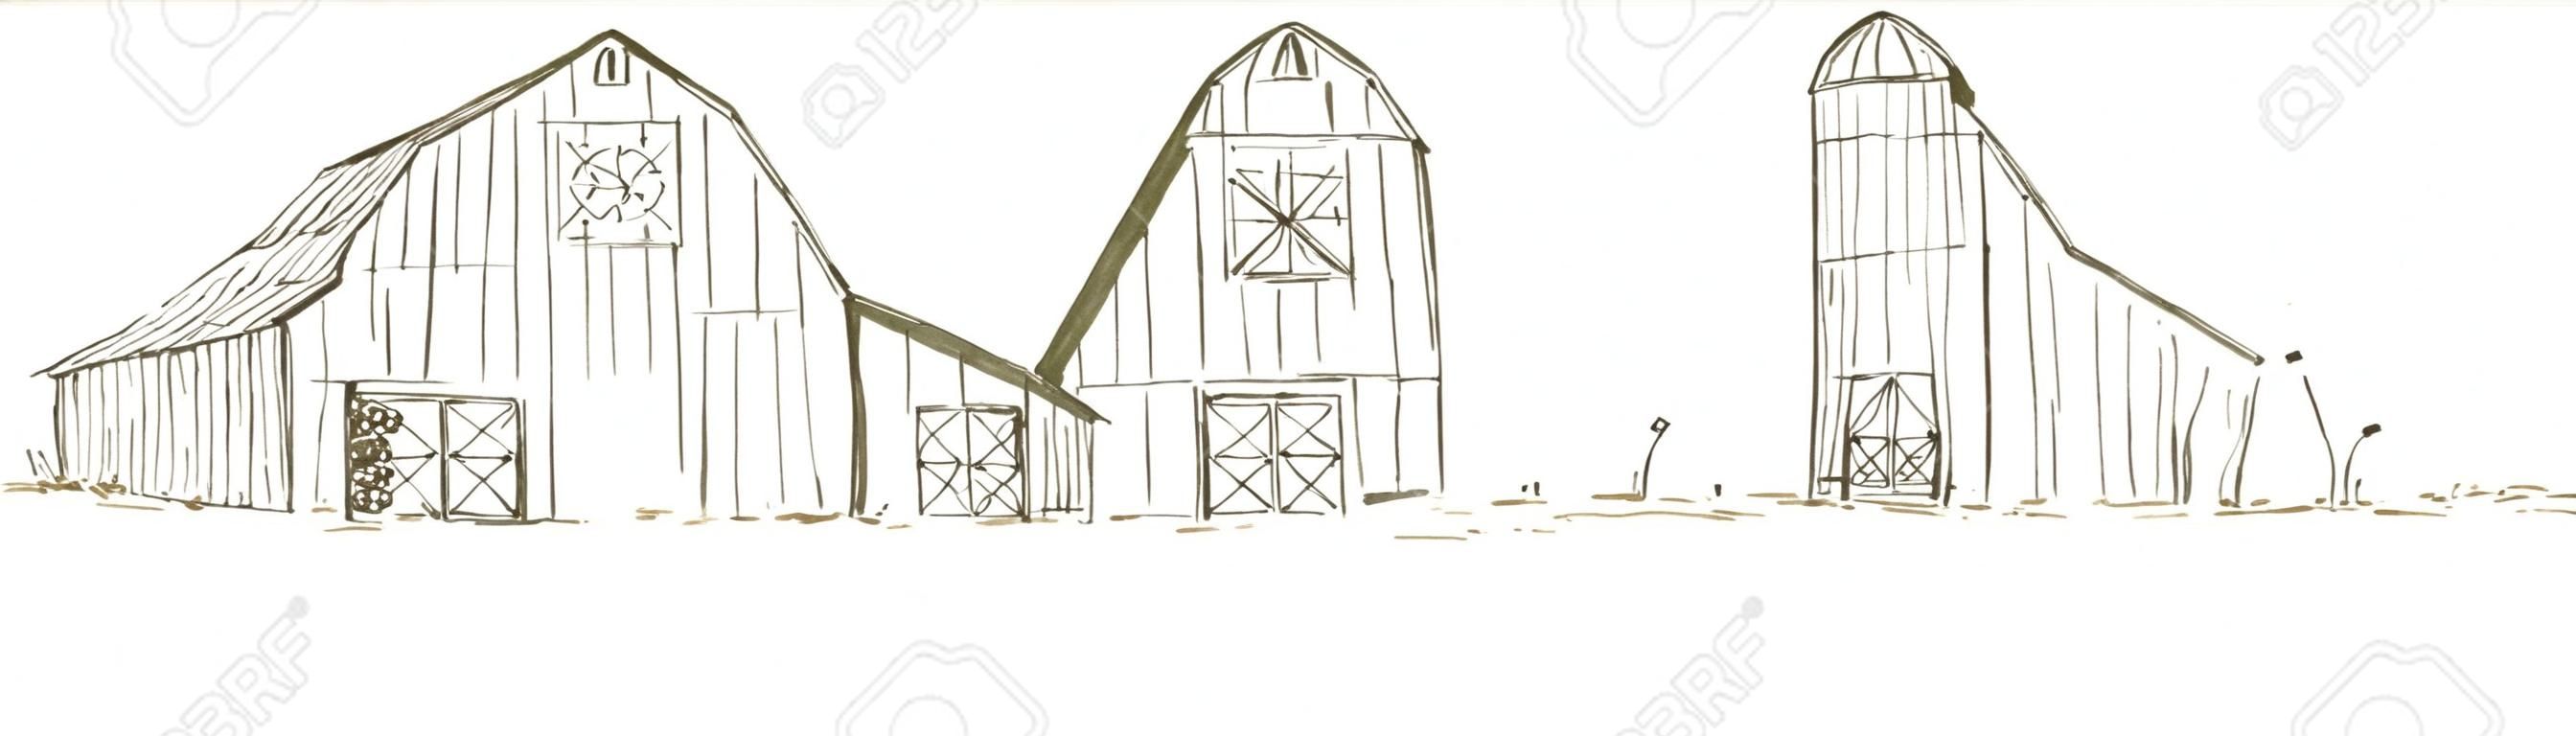 Pen and ink style illustration of an old barn/farm scene.